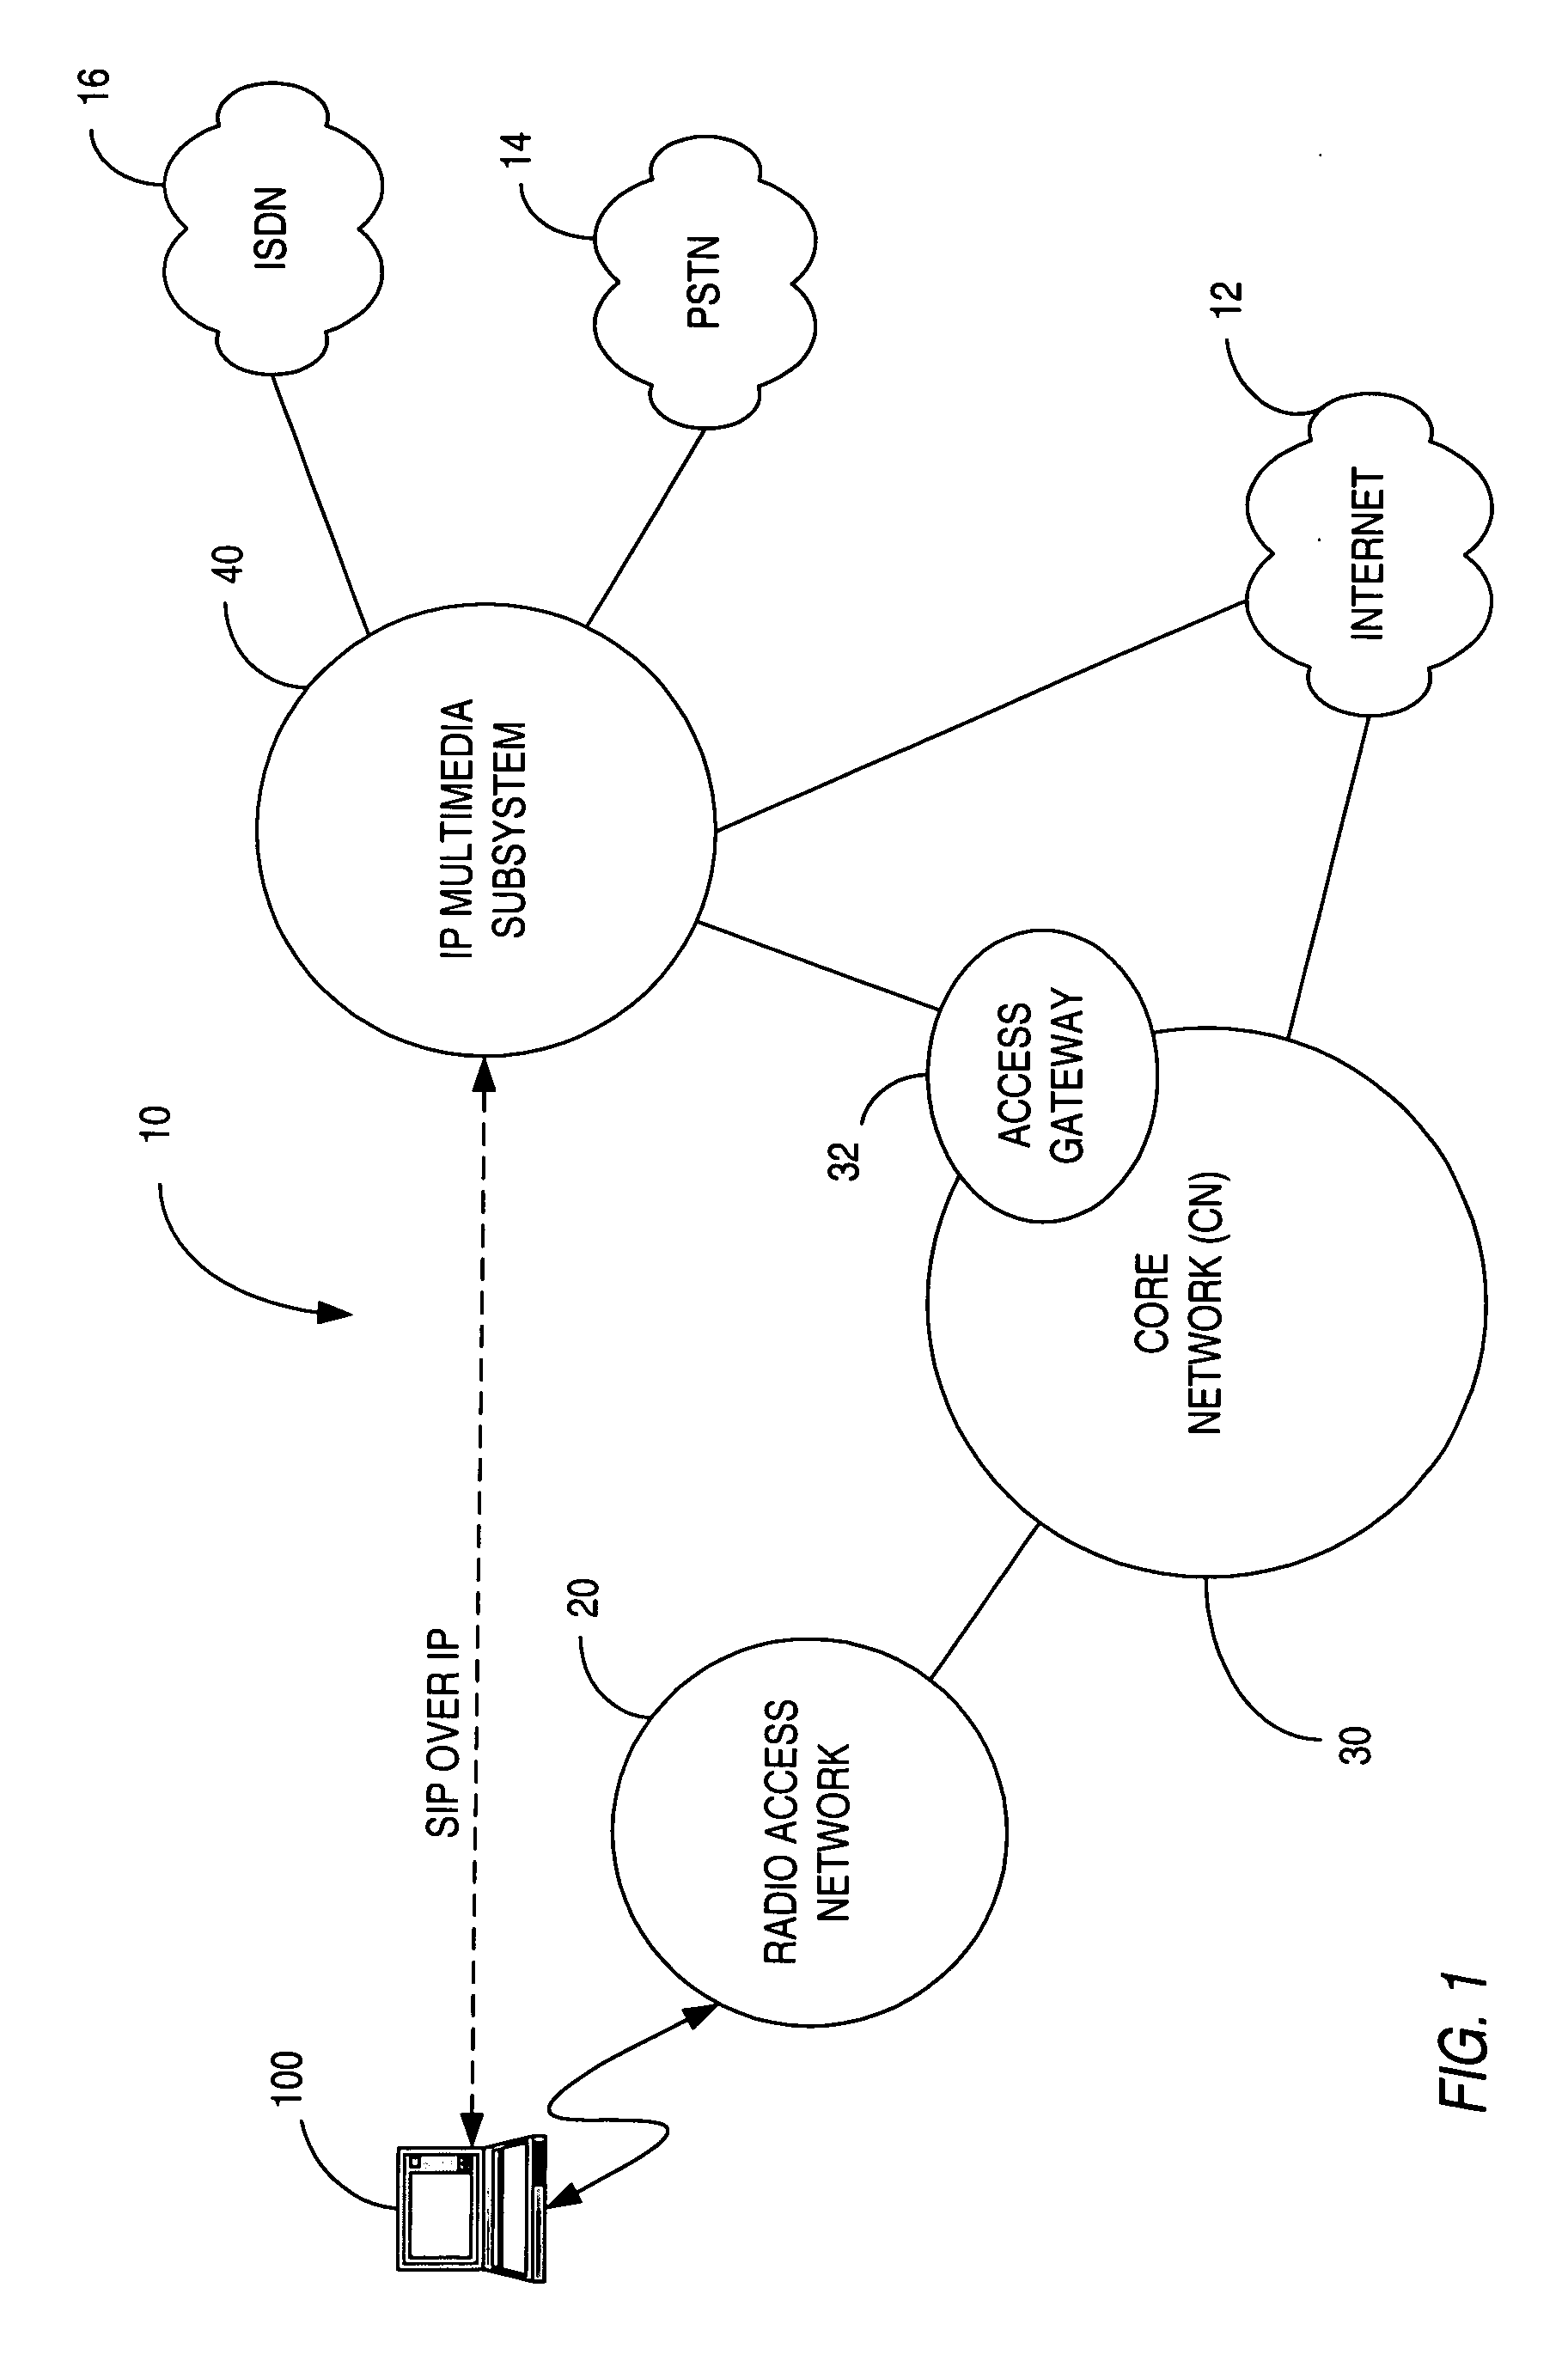 Method for generating and sending signaling messages